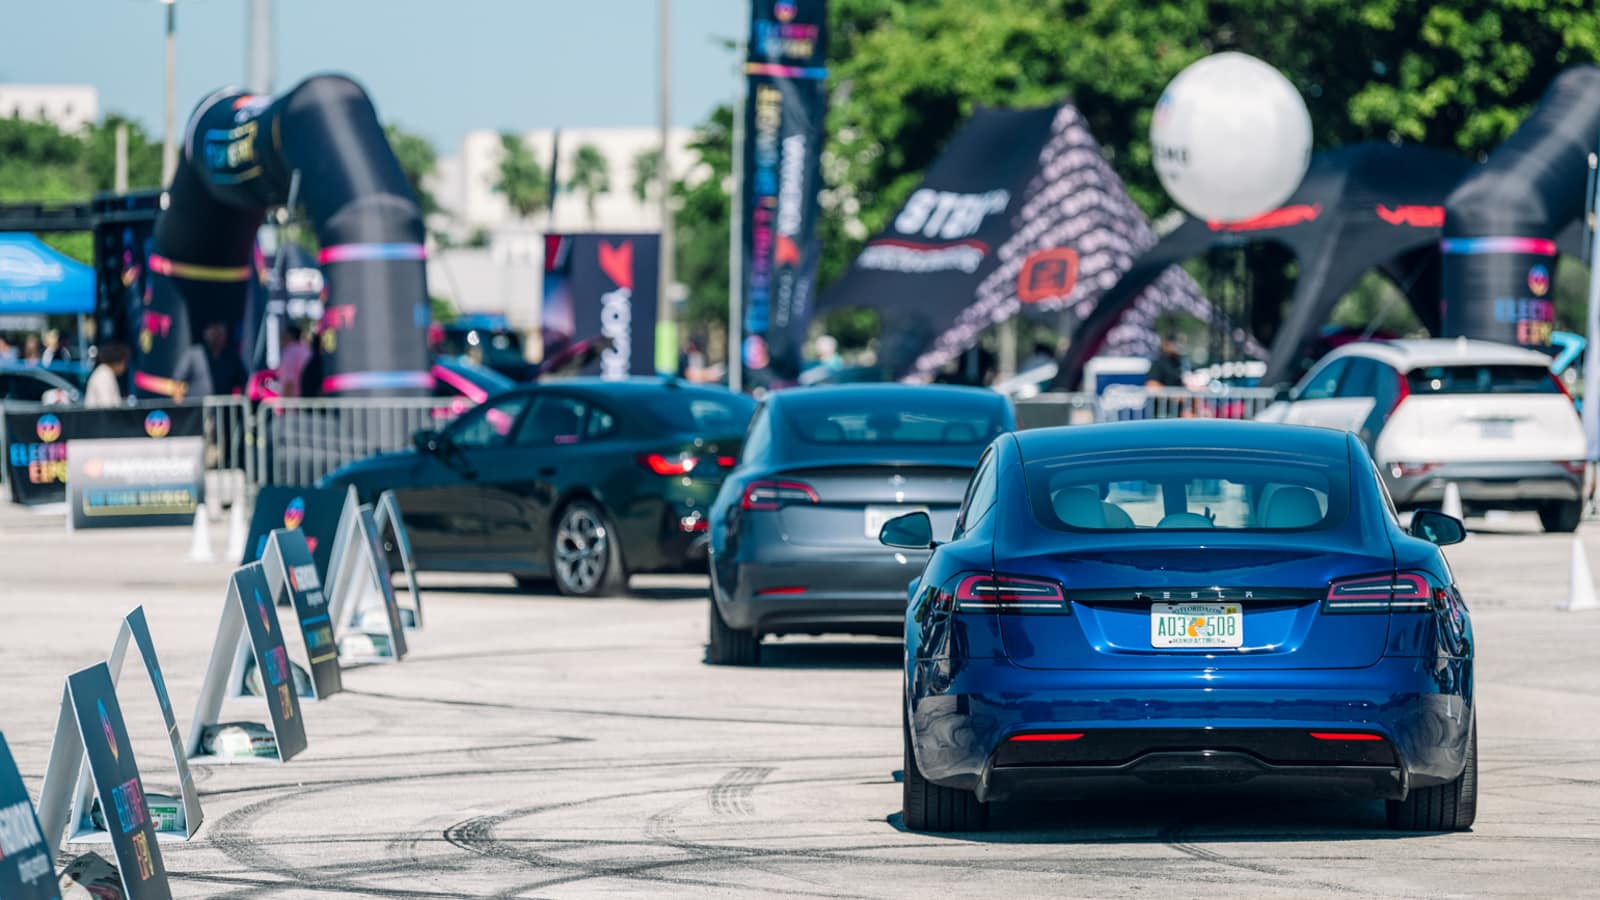 Electrify Expo attendees test driving the Telsa Model 3 and Tesla Model S - Electric Vehicles Not Selling Fast